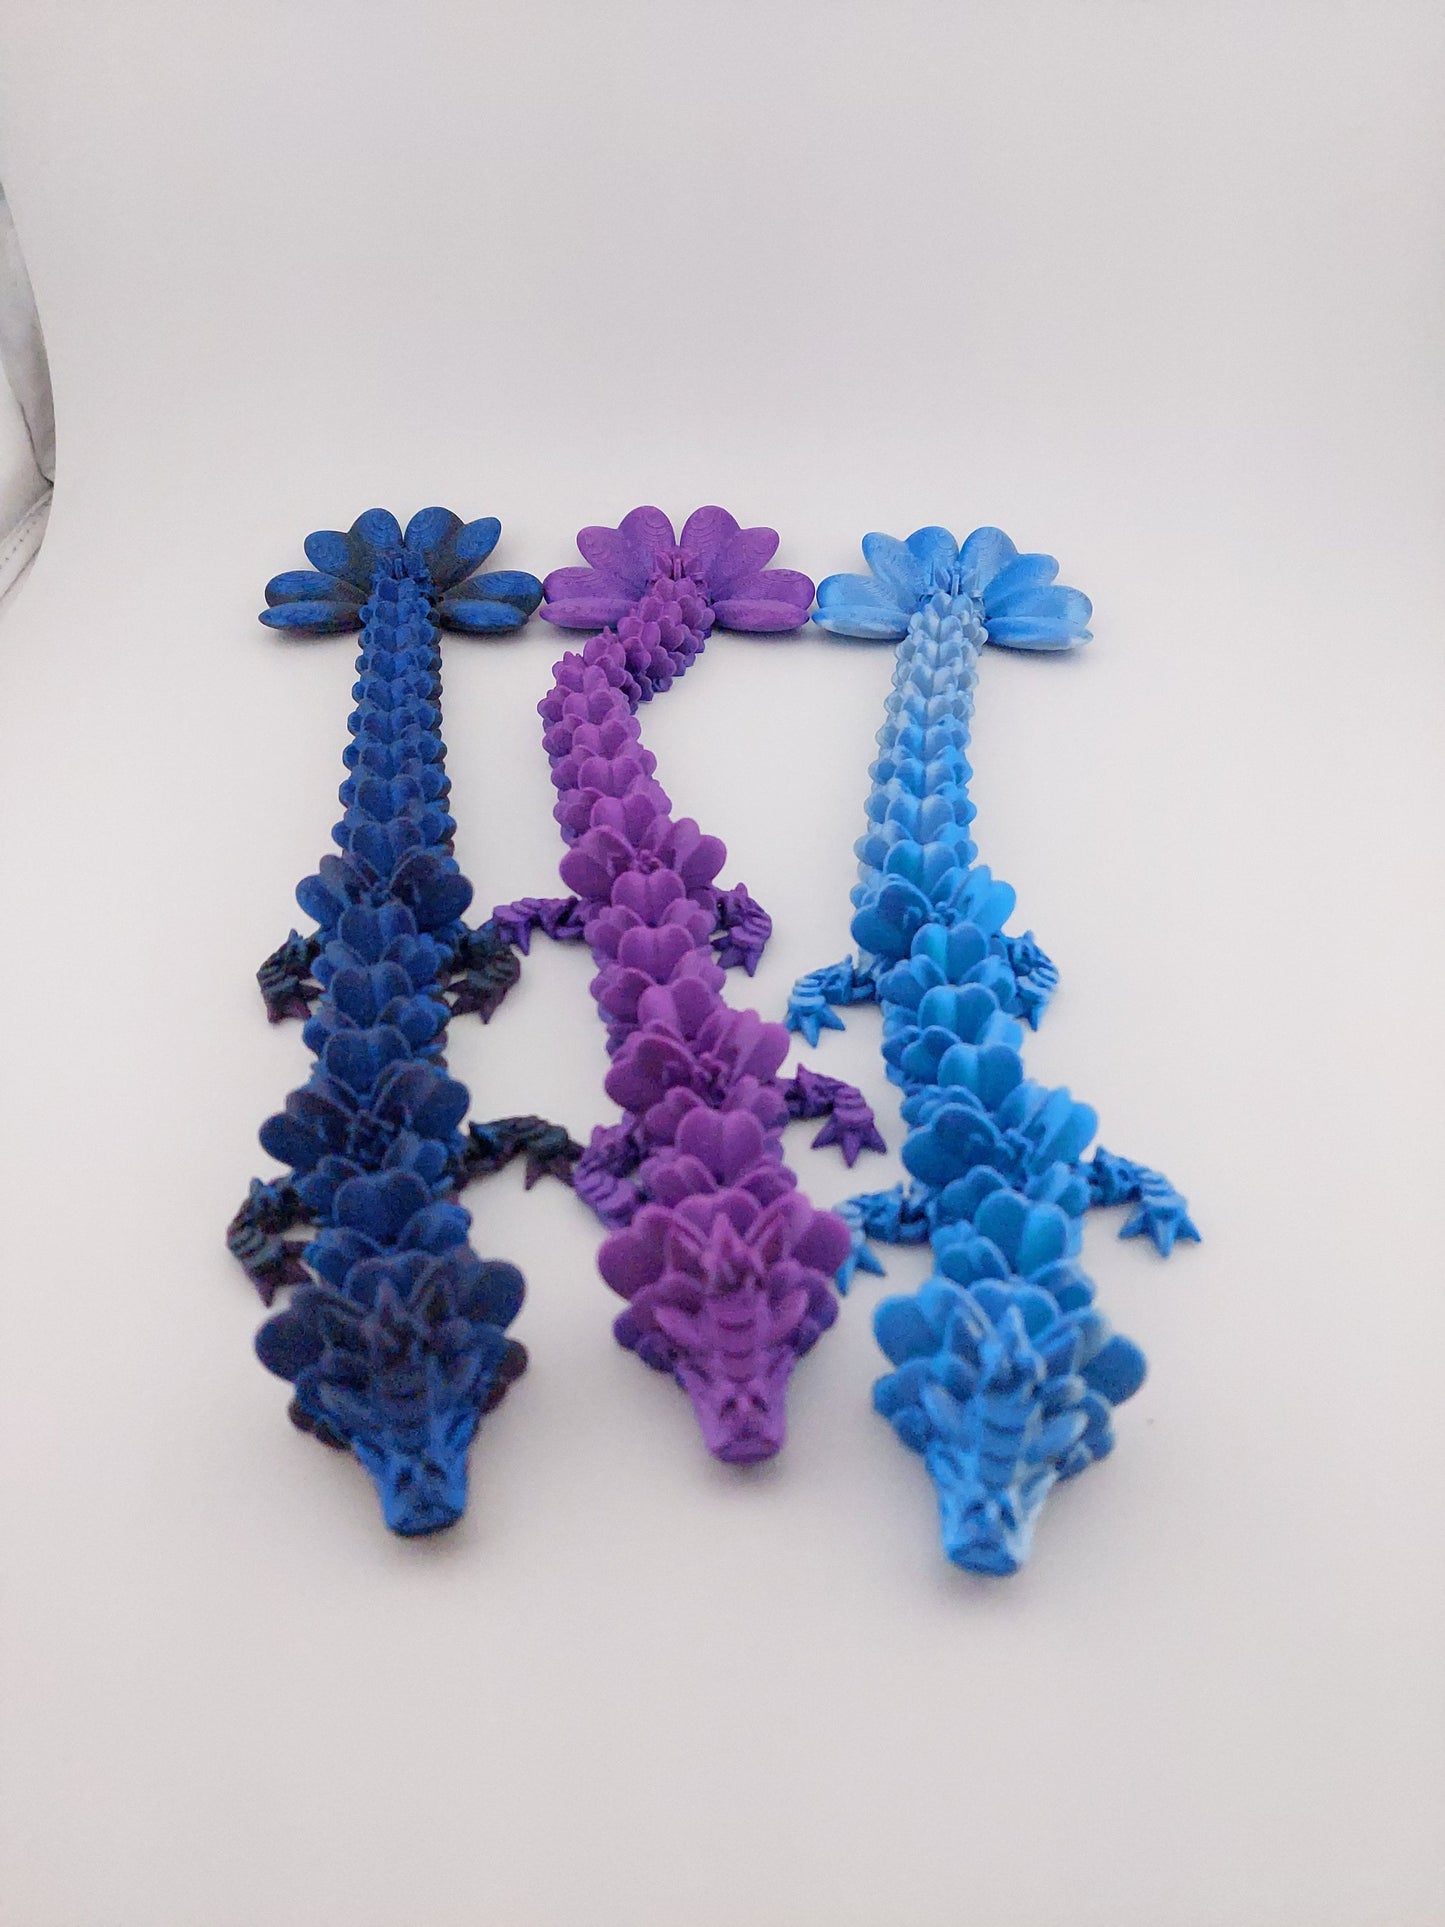 1 Articulated Clover Dragon - 3D Printed Fidget Fantasy Creature - Customizable Colors - Cinderwing3d- 12 Inch